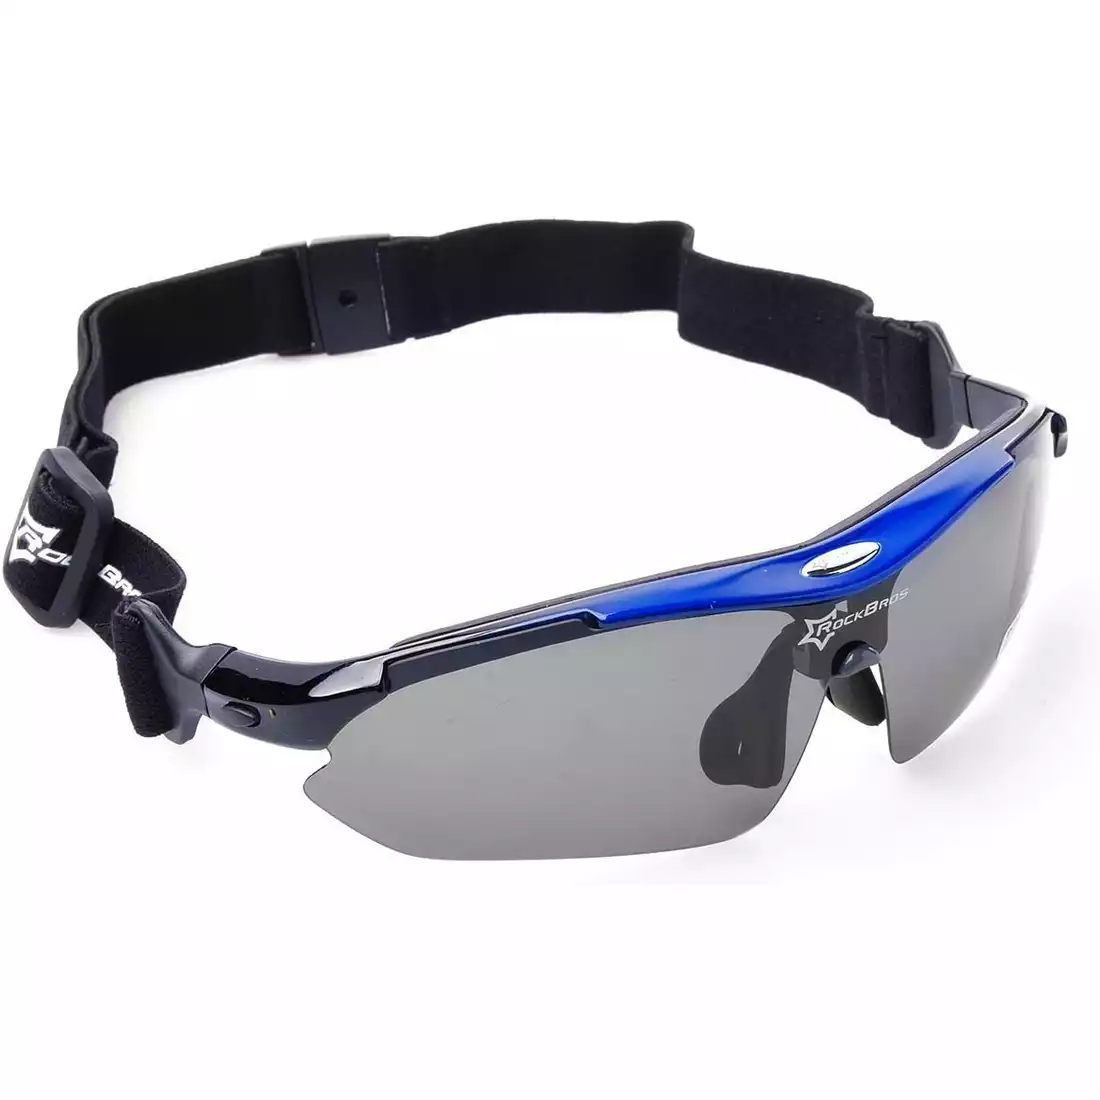 RockBros 10007 bicycle / sports goggles with polarized 5 interchangeable lenses blue